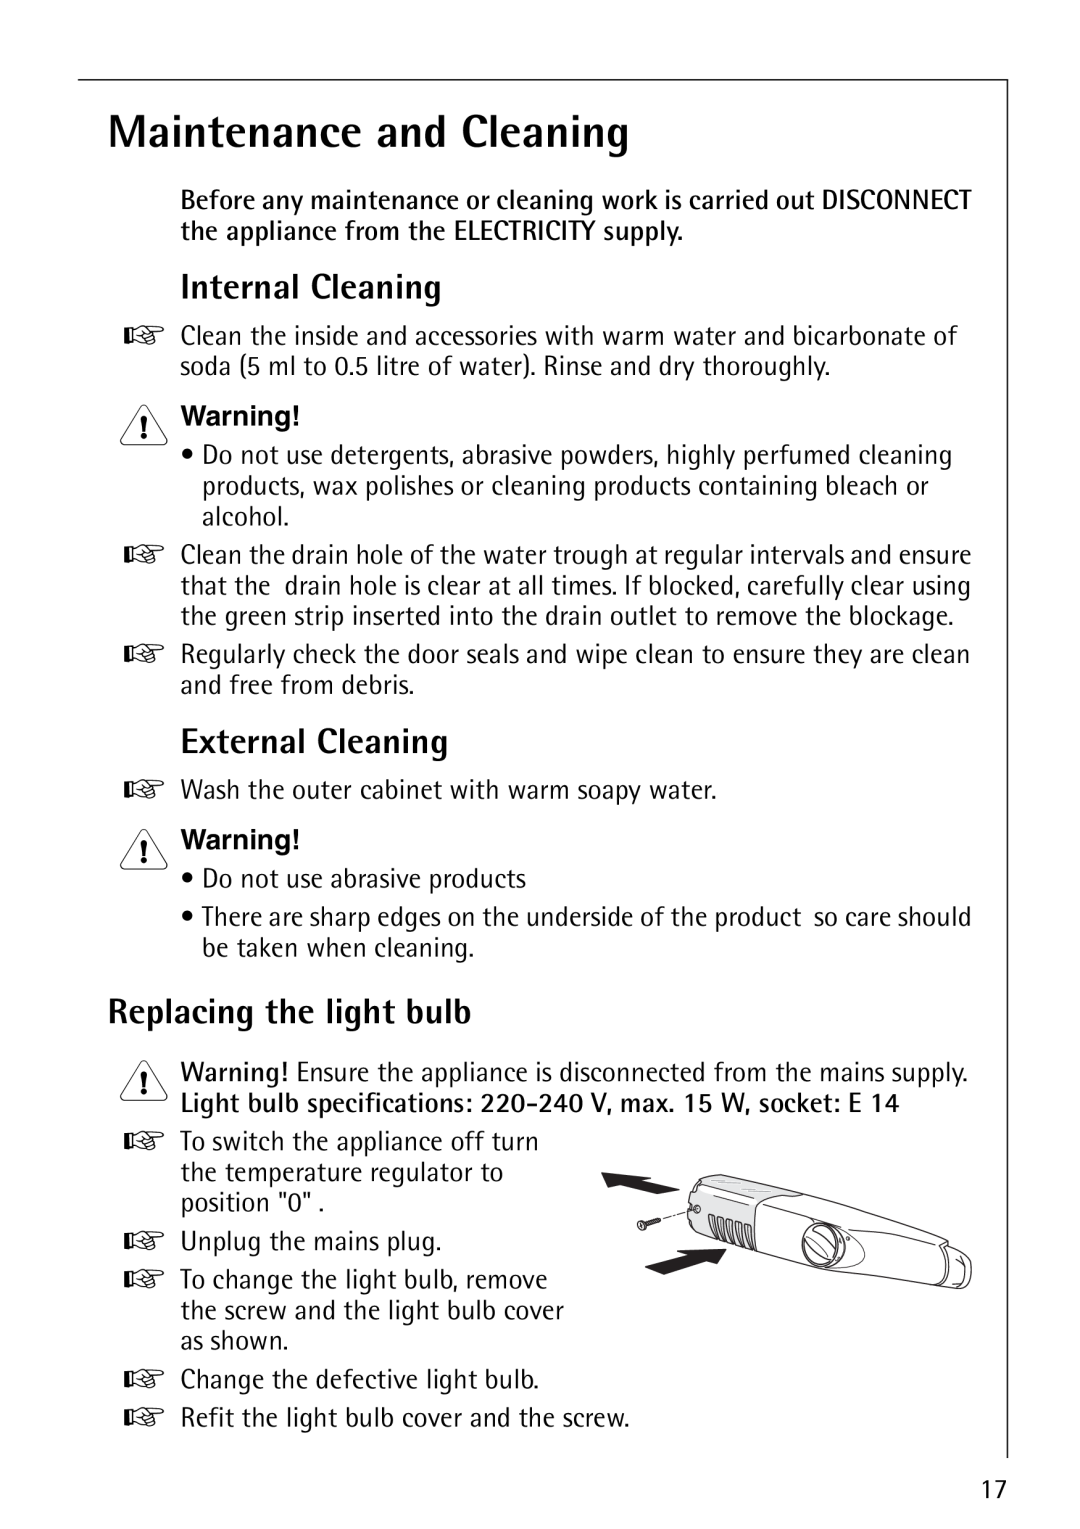 Electrolux Integrated Maintenance and Cleaning, Internal Cleaning, External Cleaning, Replacing the light bulb, Warning 